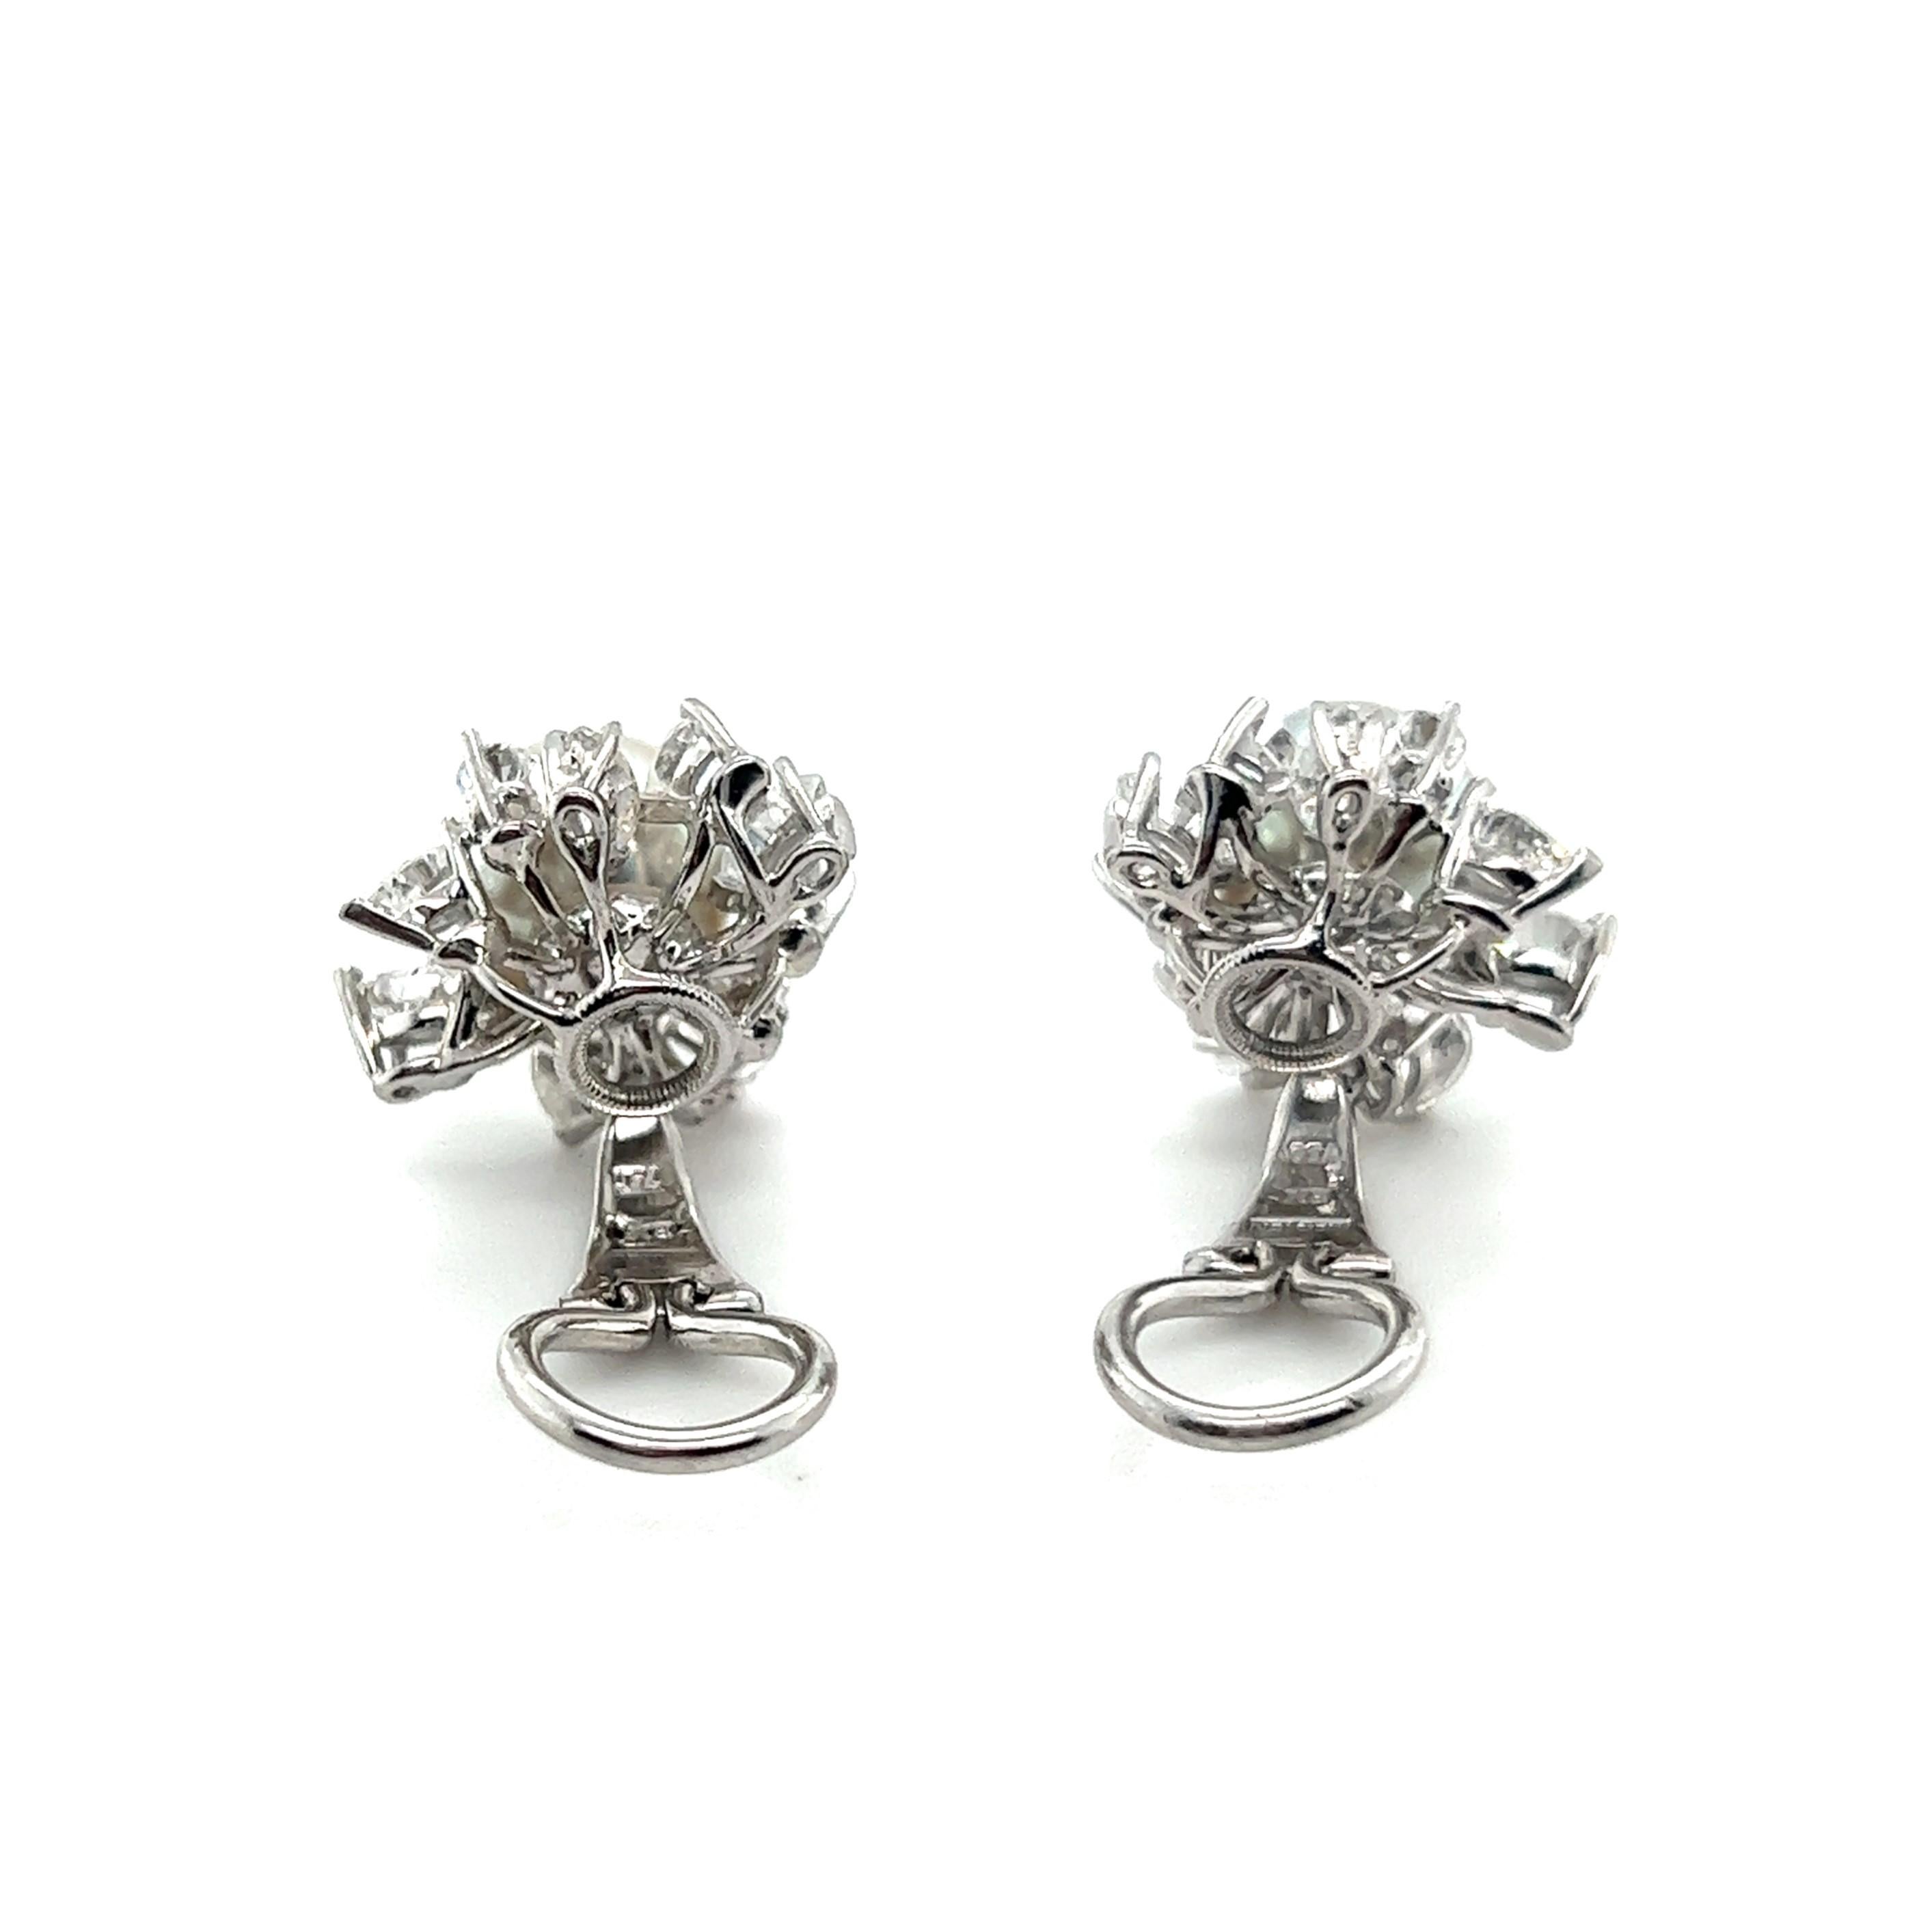 Women's or Men's Clip-on Earrings with Pearls and Diamonds in 18 Karat White Gold by Meister